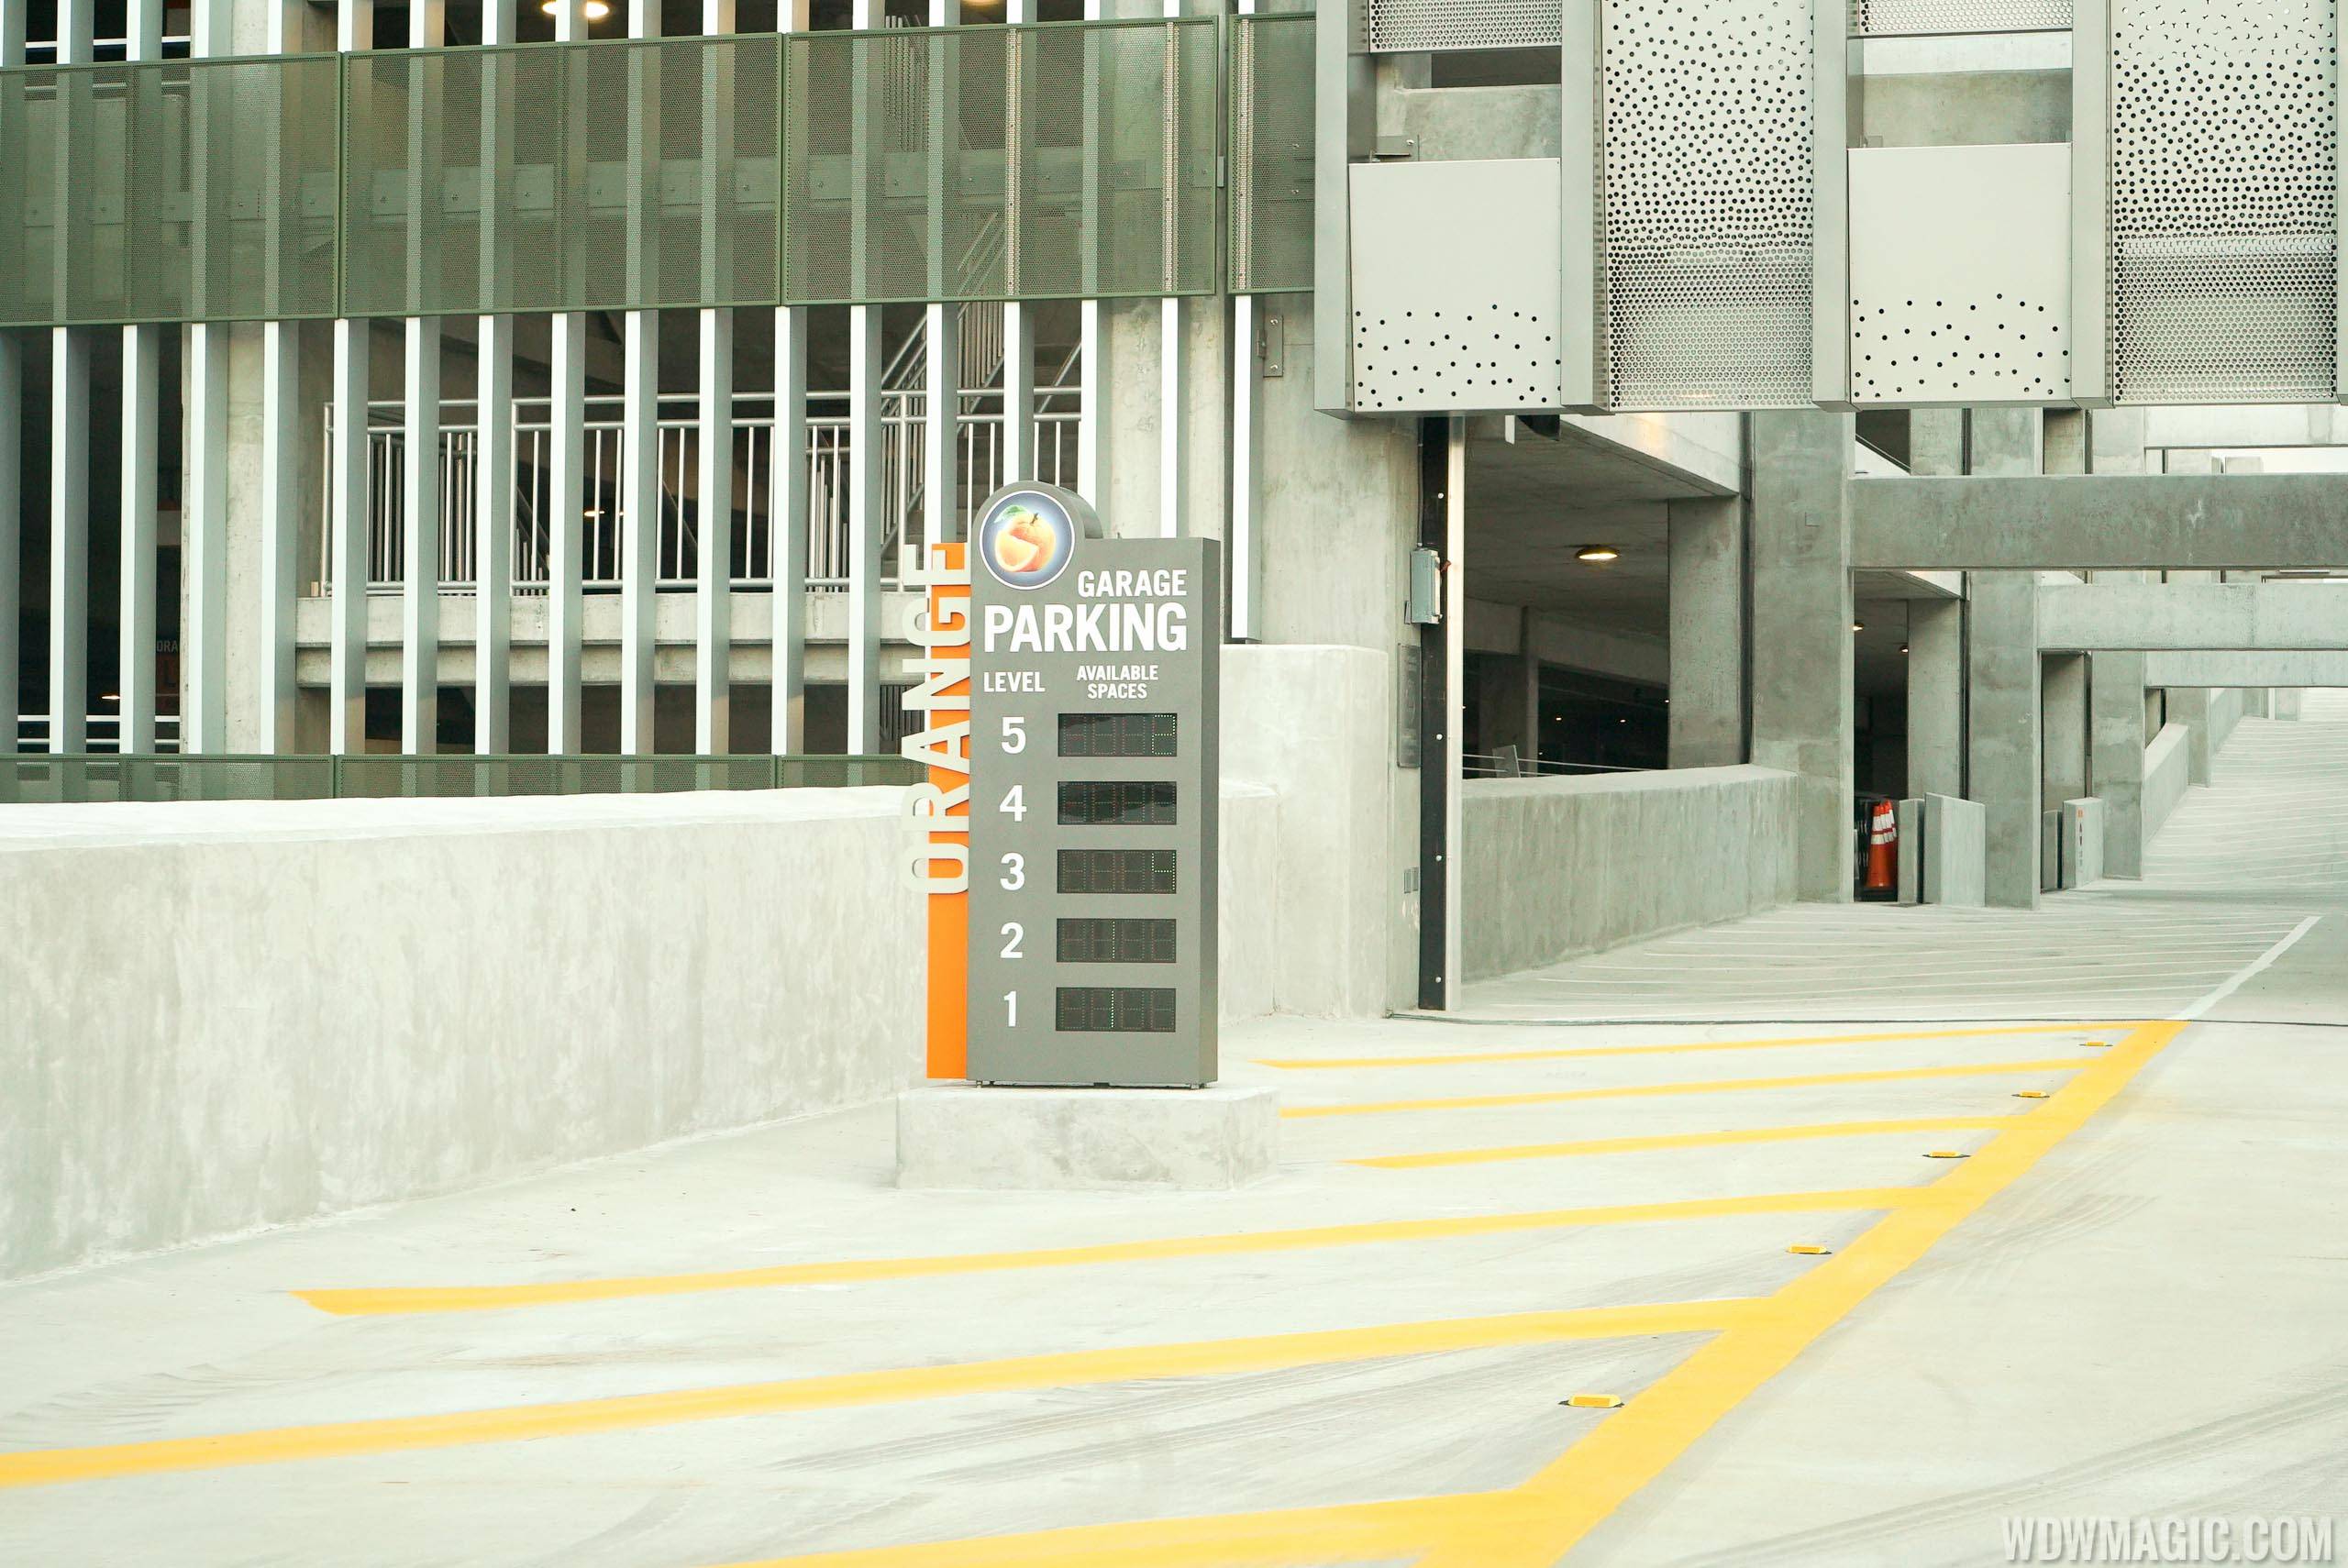 Entrance to L3 of the Orange Parking Garage from the flyover